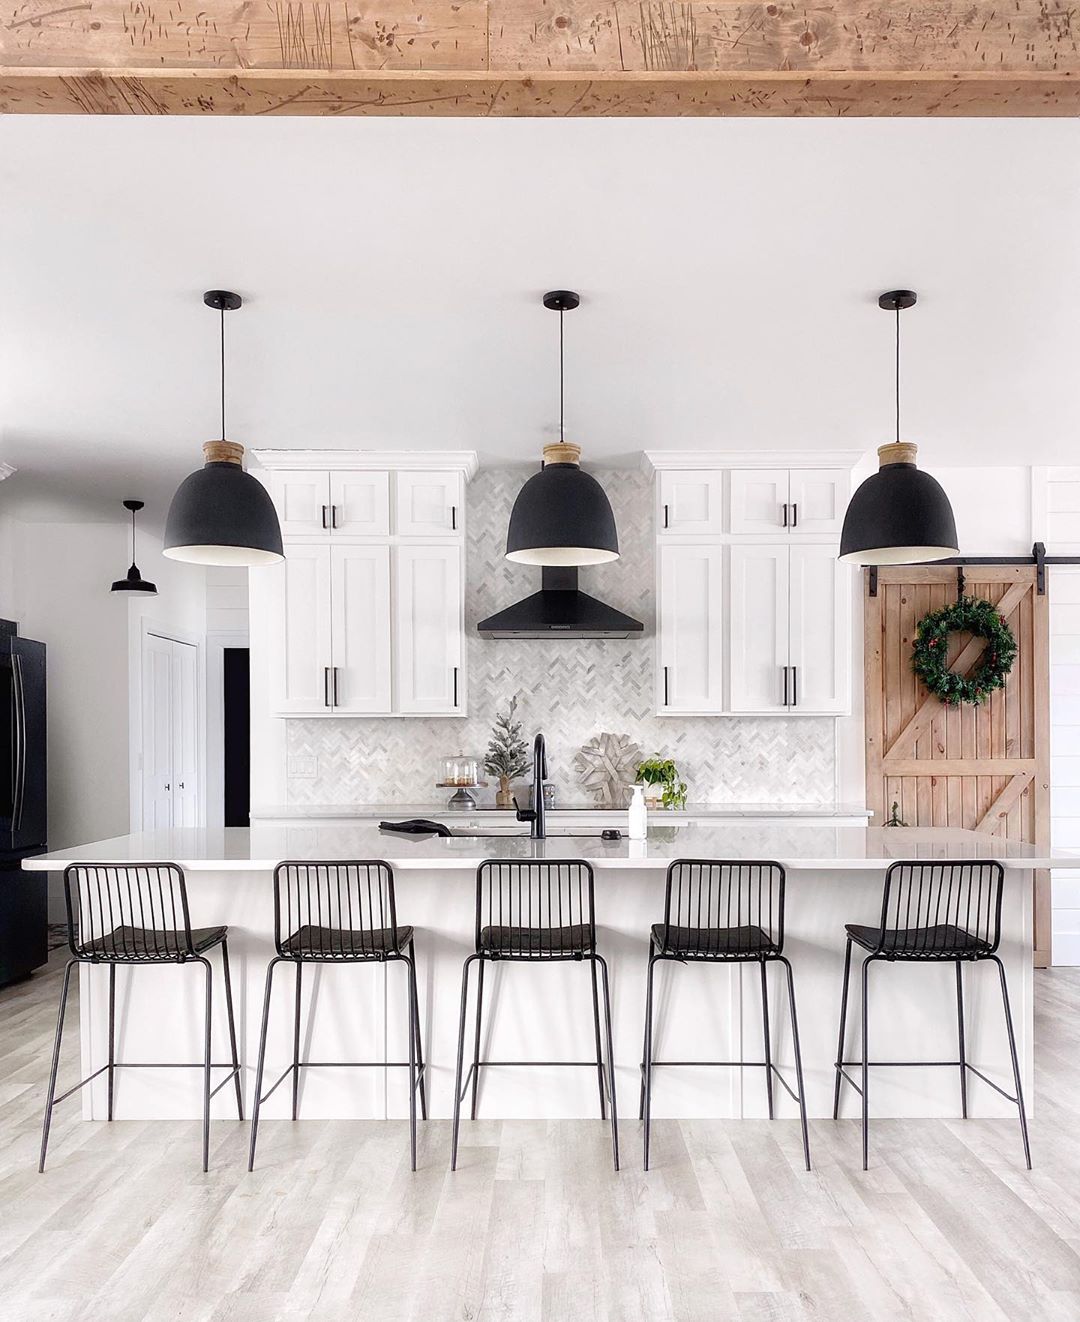 White kitchen with white cabinets and black light fixtures. Photo by Instagram user @fournorthfarmhouse